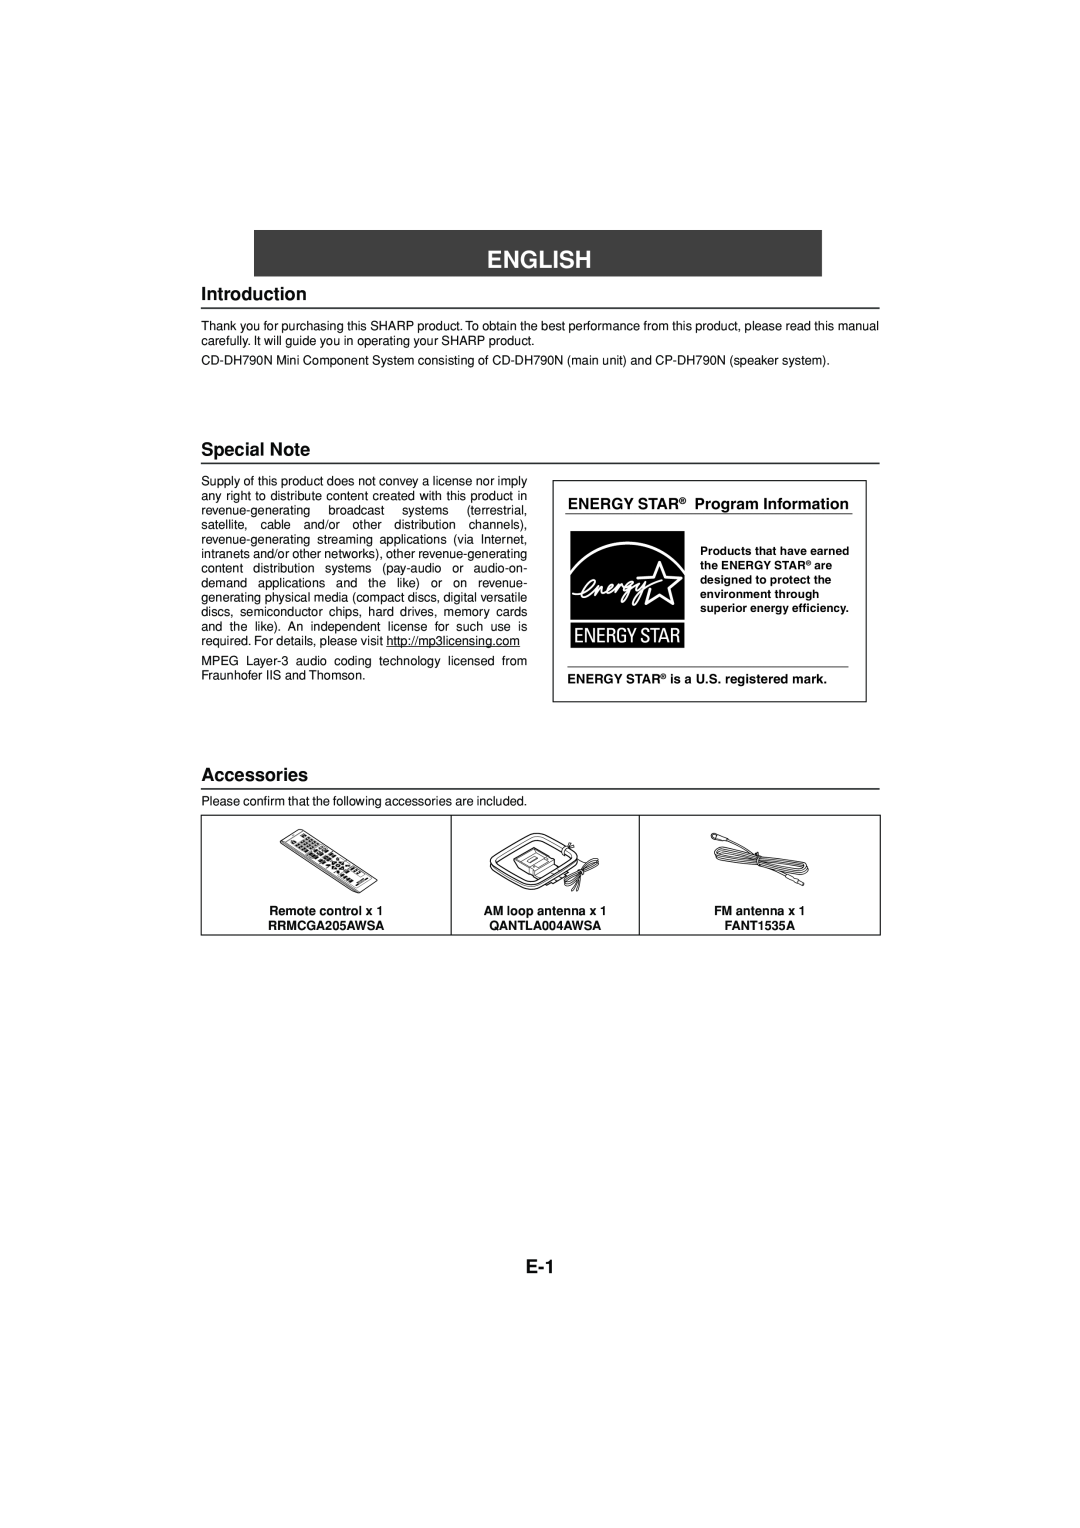 Sony CD-DH790N operation manual Introduction, Special Note, Accessories, English, ENERGY STAR is a U.S. registered mark 